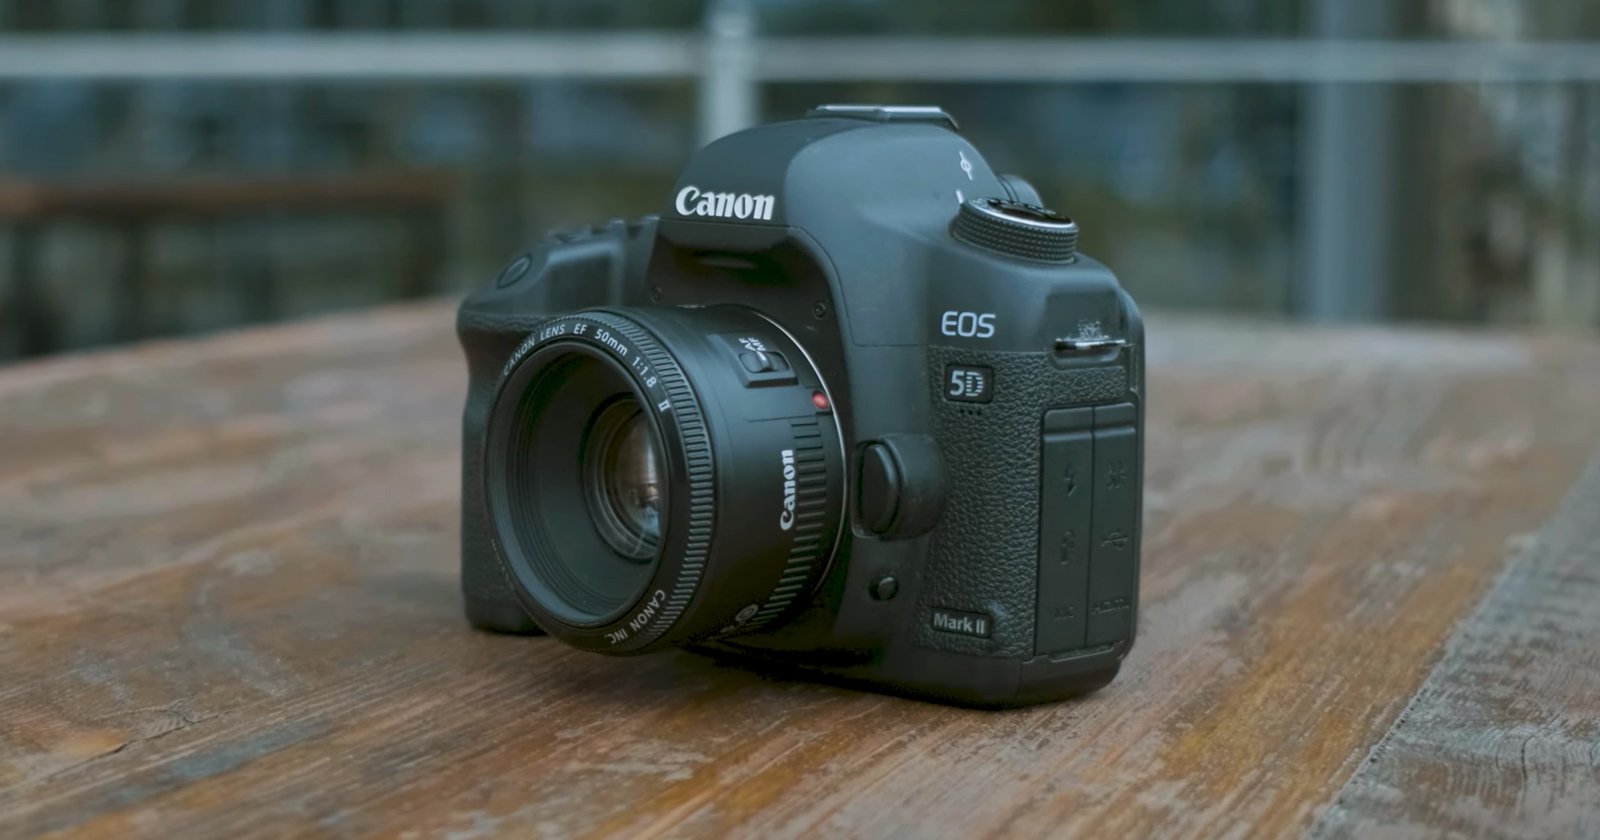 Opinion: A Used Canon 5D Mark II is the Best Camera for Beginners